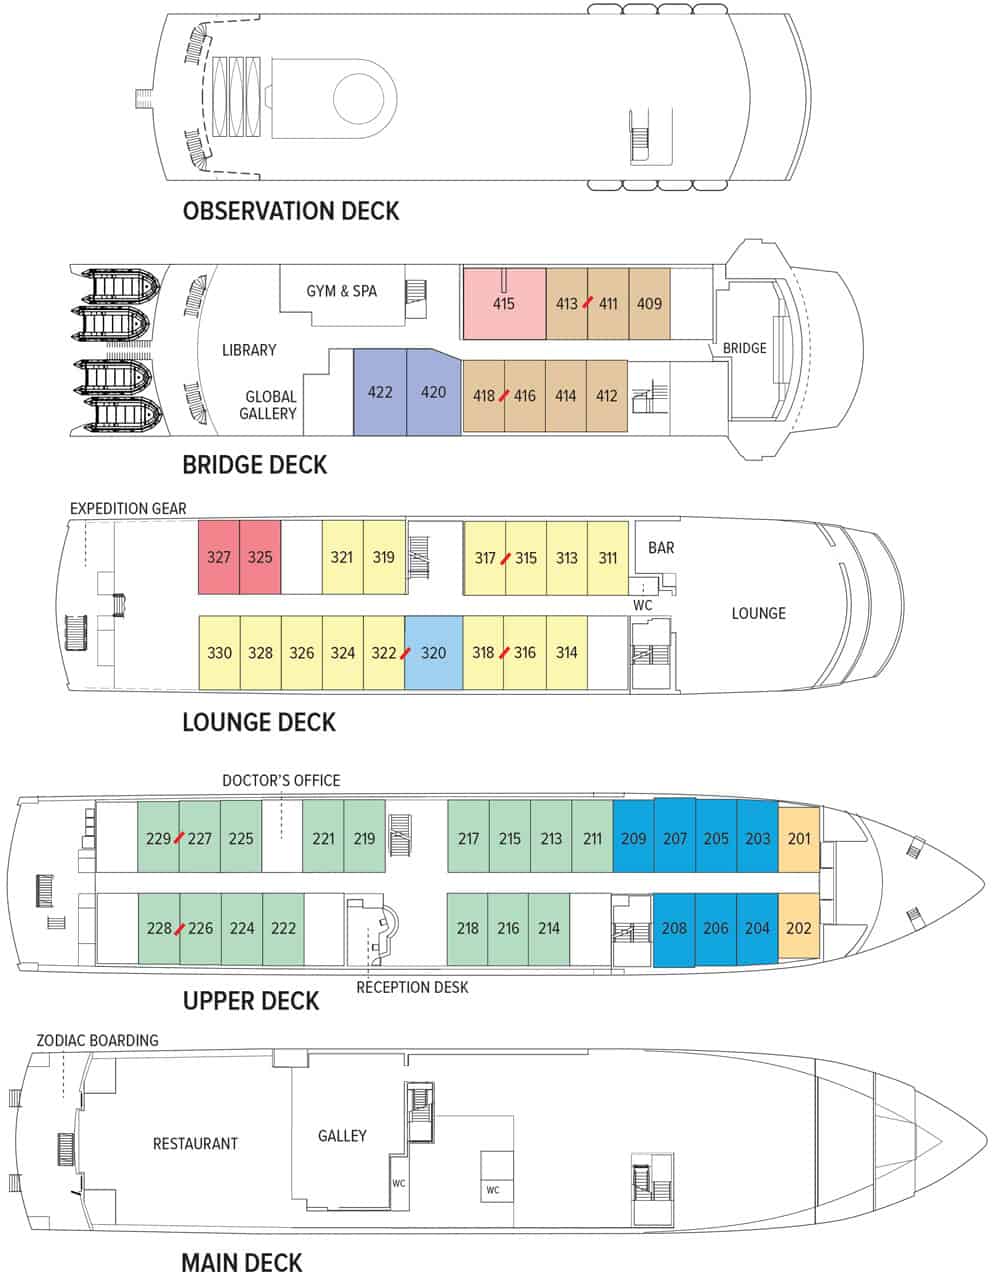 Deck plan showing Main Deck, Upper Deck, Lounge Deck, Bridge Deck and Observation Deck of Endeavour II Galapagos Islands expedition ship